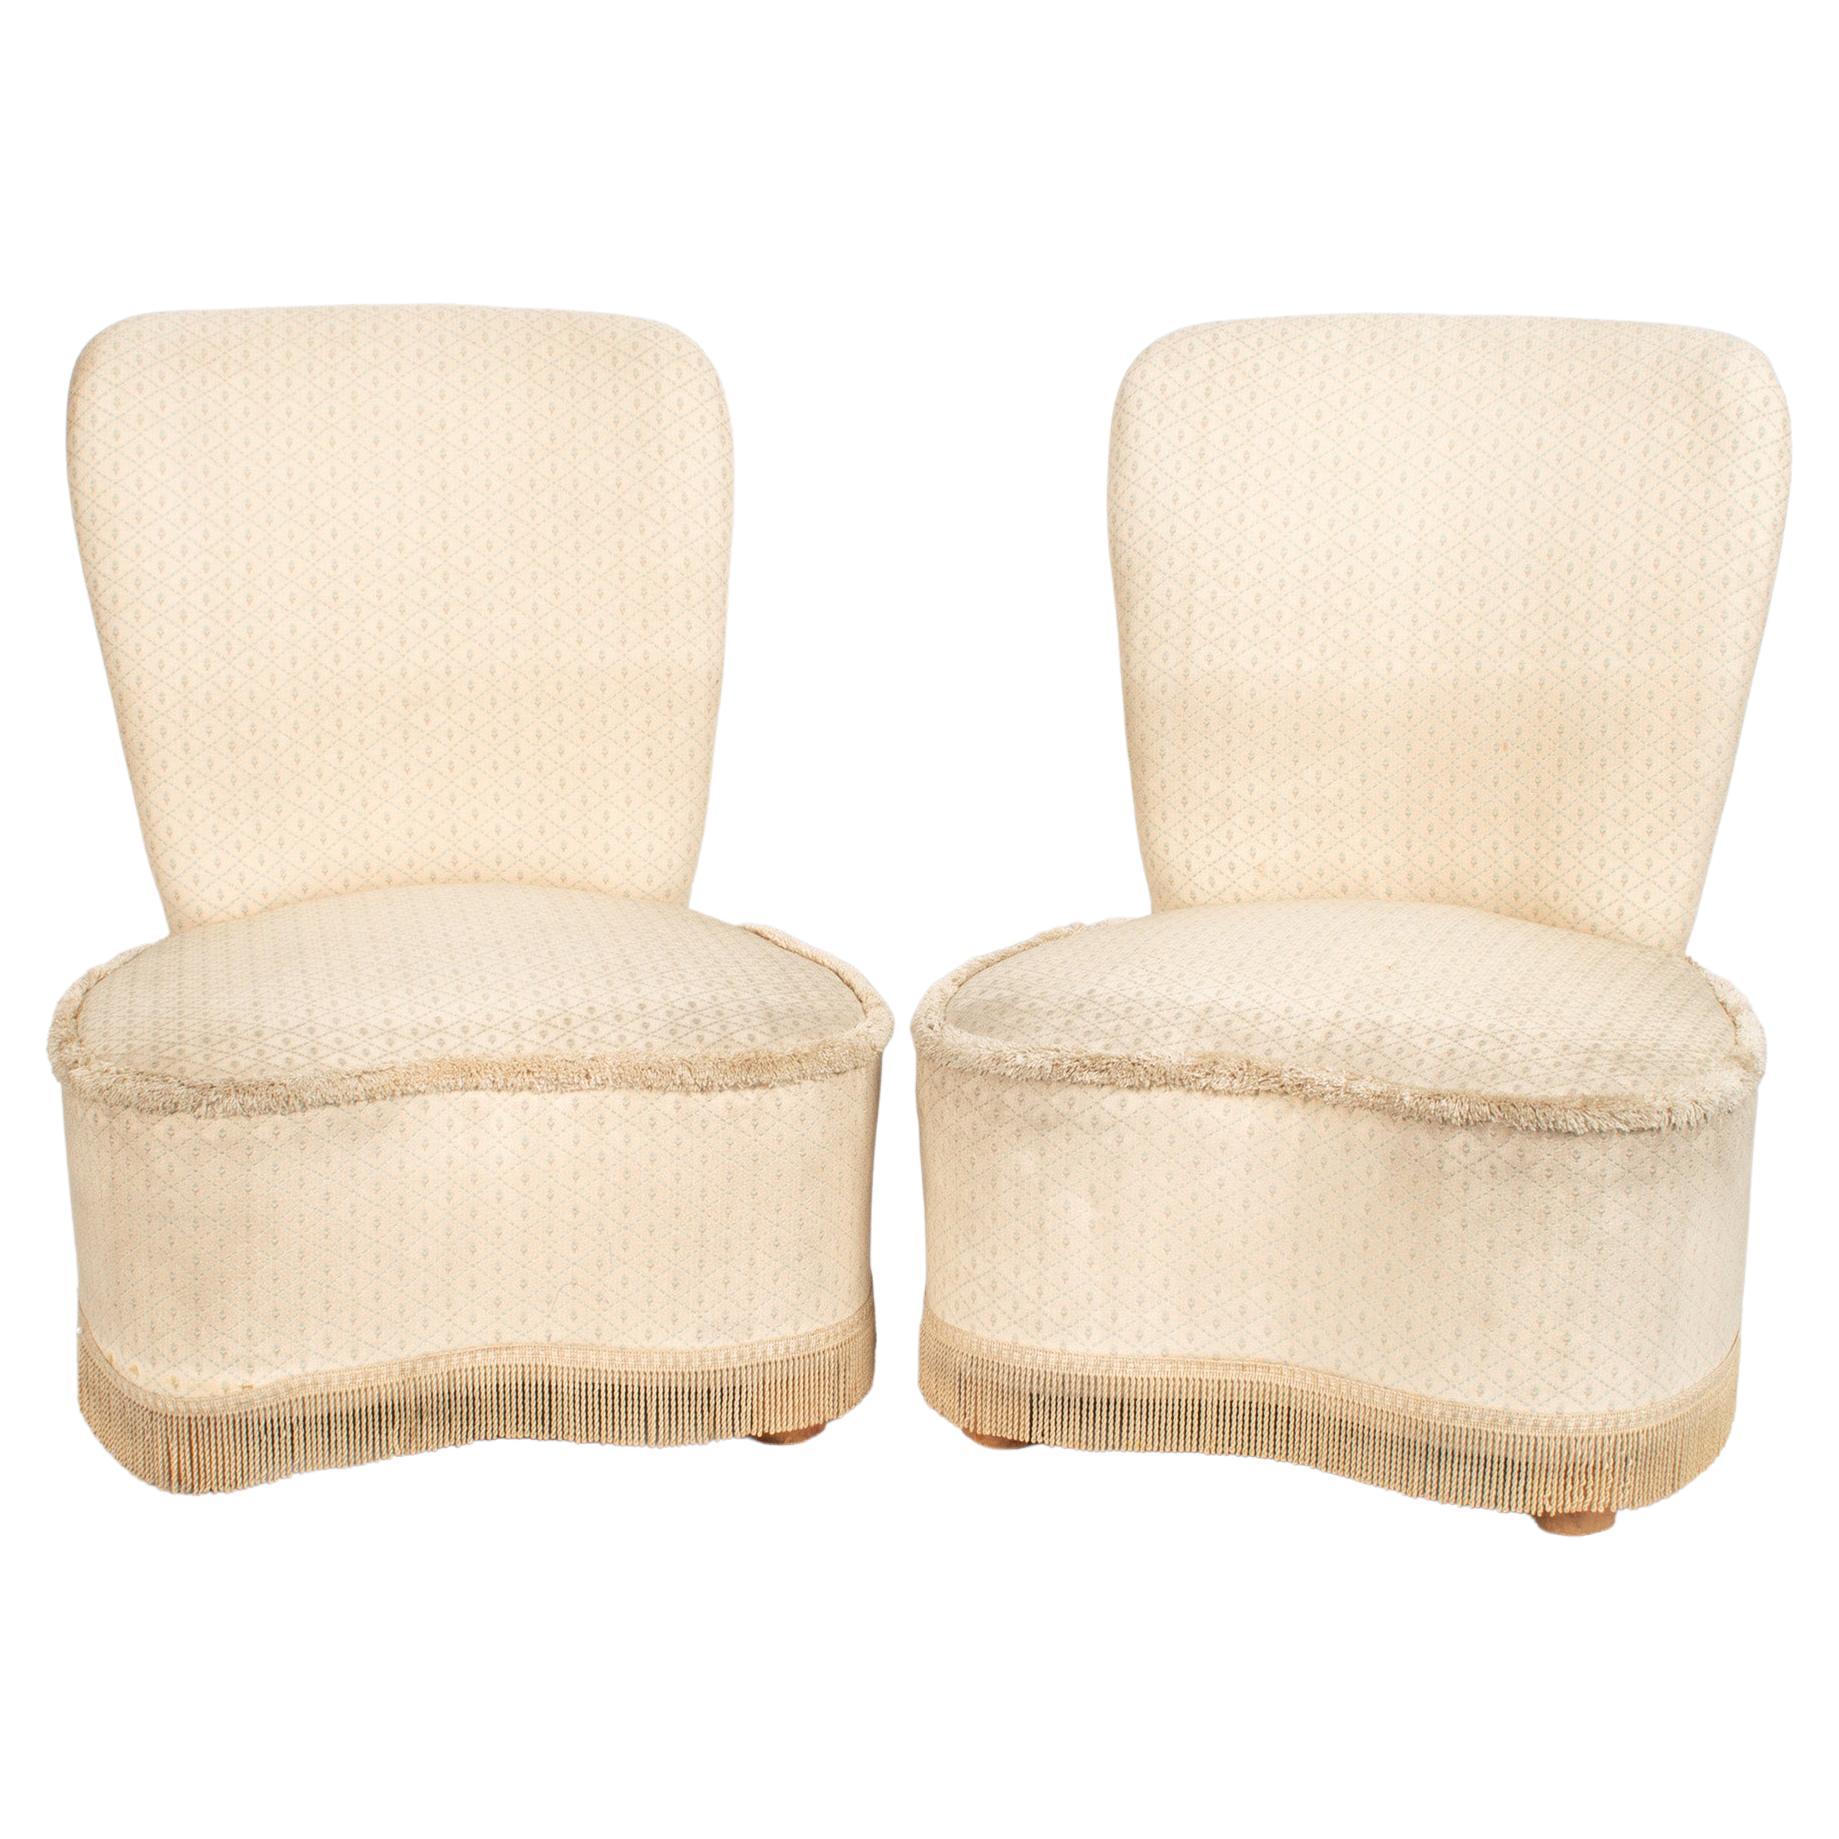 Pair of French Art Deco Upholstered Boudoir Chairs, C.1940